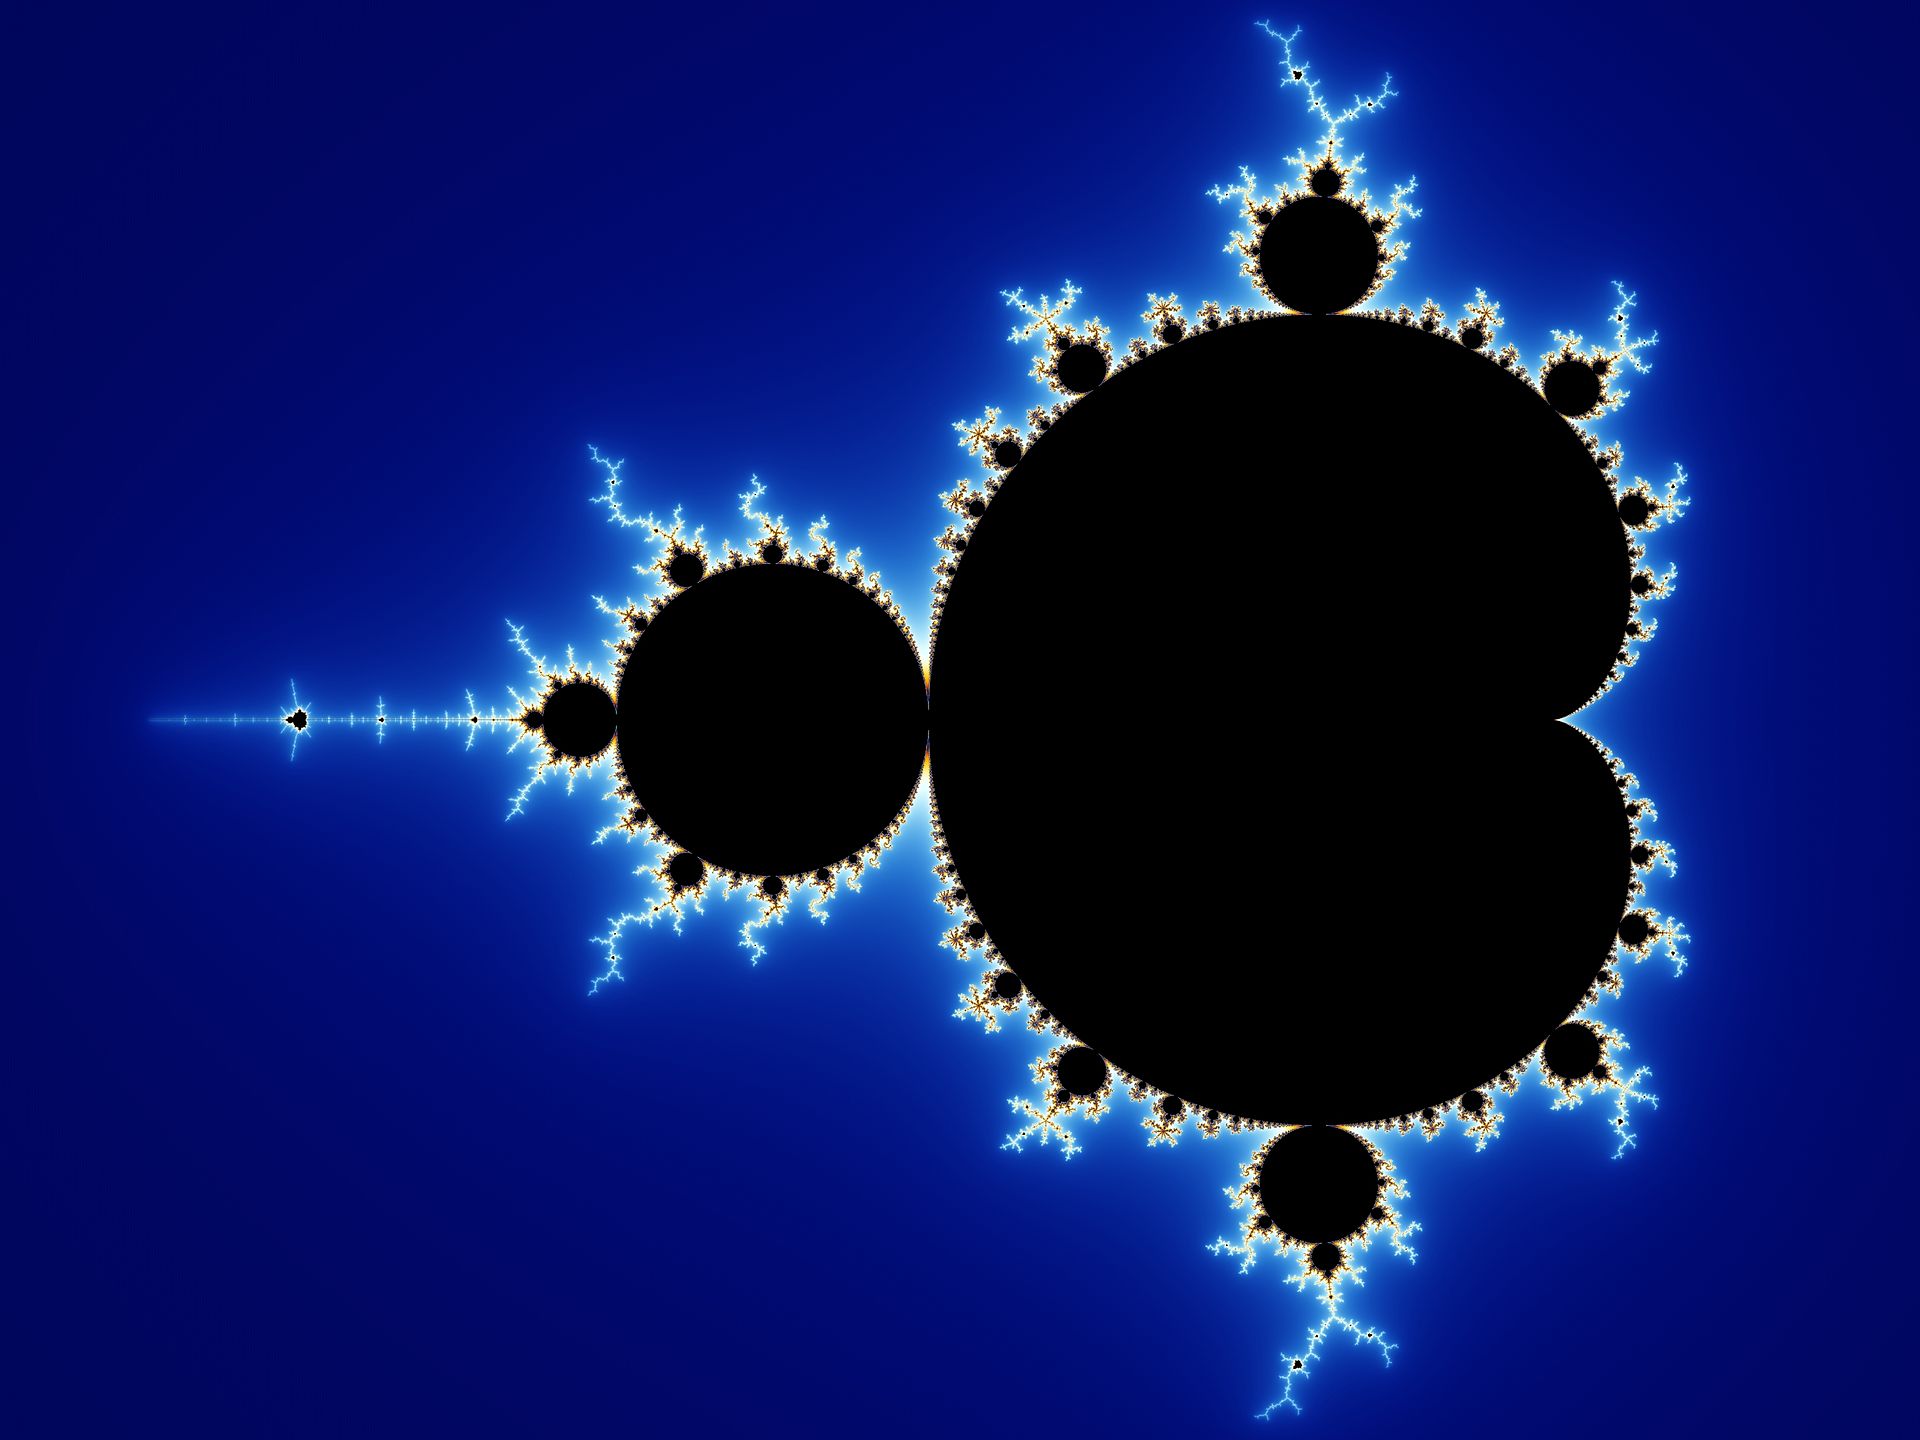 Visualisation of a fractal by Wolfgang Beyer with the program Ultra Fractal 3. - Own work, CC BY-SA 3.0, https://commons.wikimedia.org/w/index.php?curid=321973